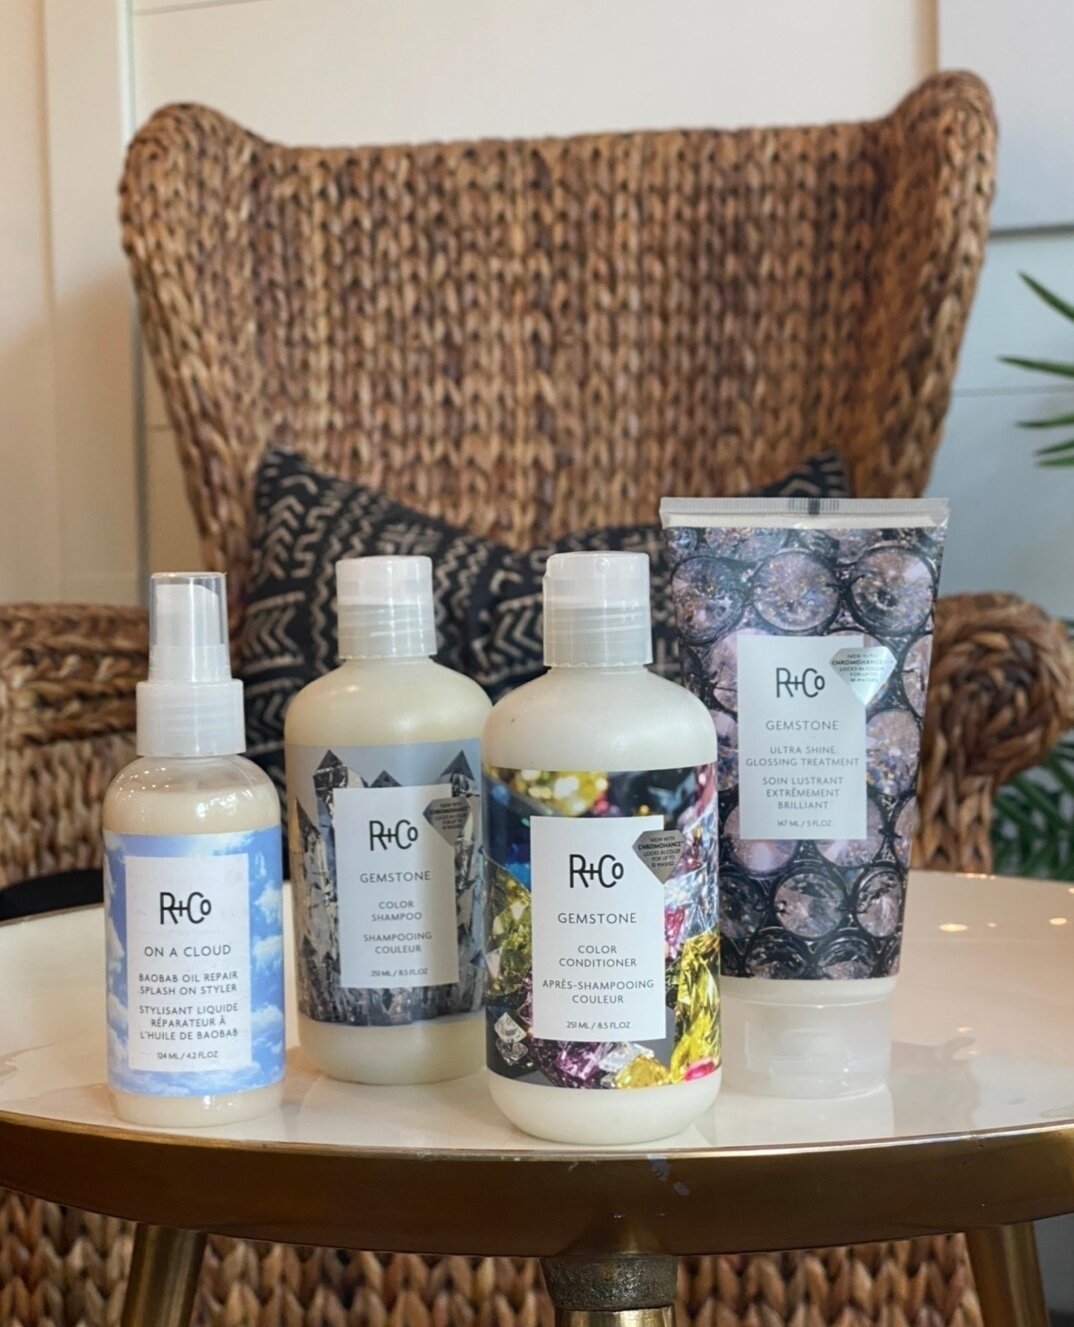 Check out our product story highlight for a closer look at our favorite @randco hair products 💚 Don't forget to ask your Vamp stylist for a personalized recommendation during your next visit! ⁠
⁠
For appointments: 📞 (407)422-8821⁠
.⁠
.⁠
.⁠
#randco 